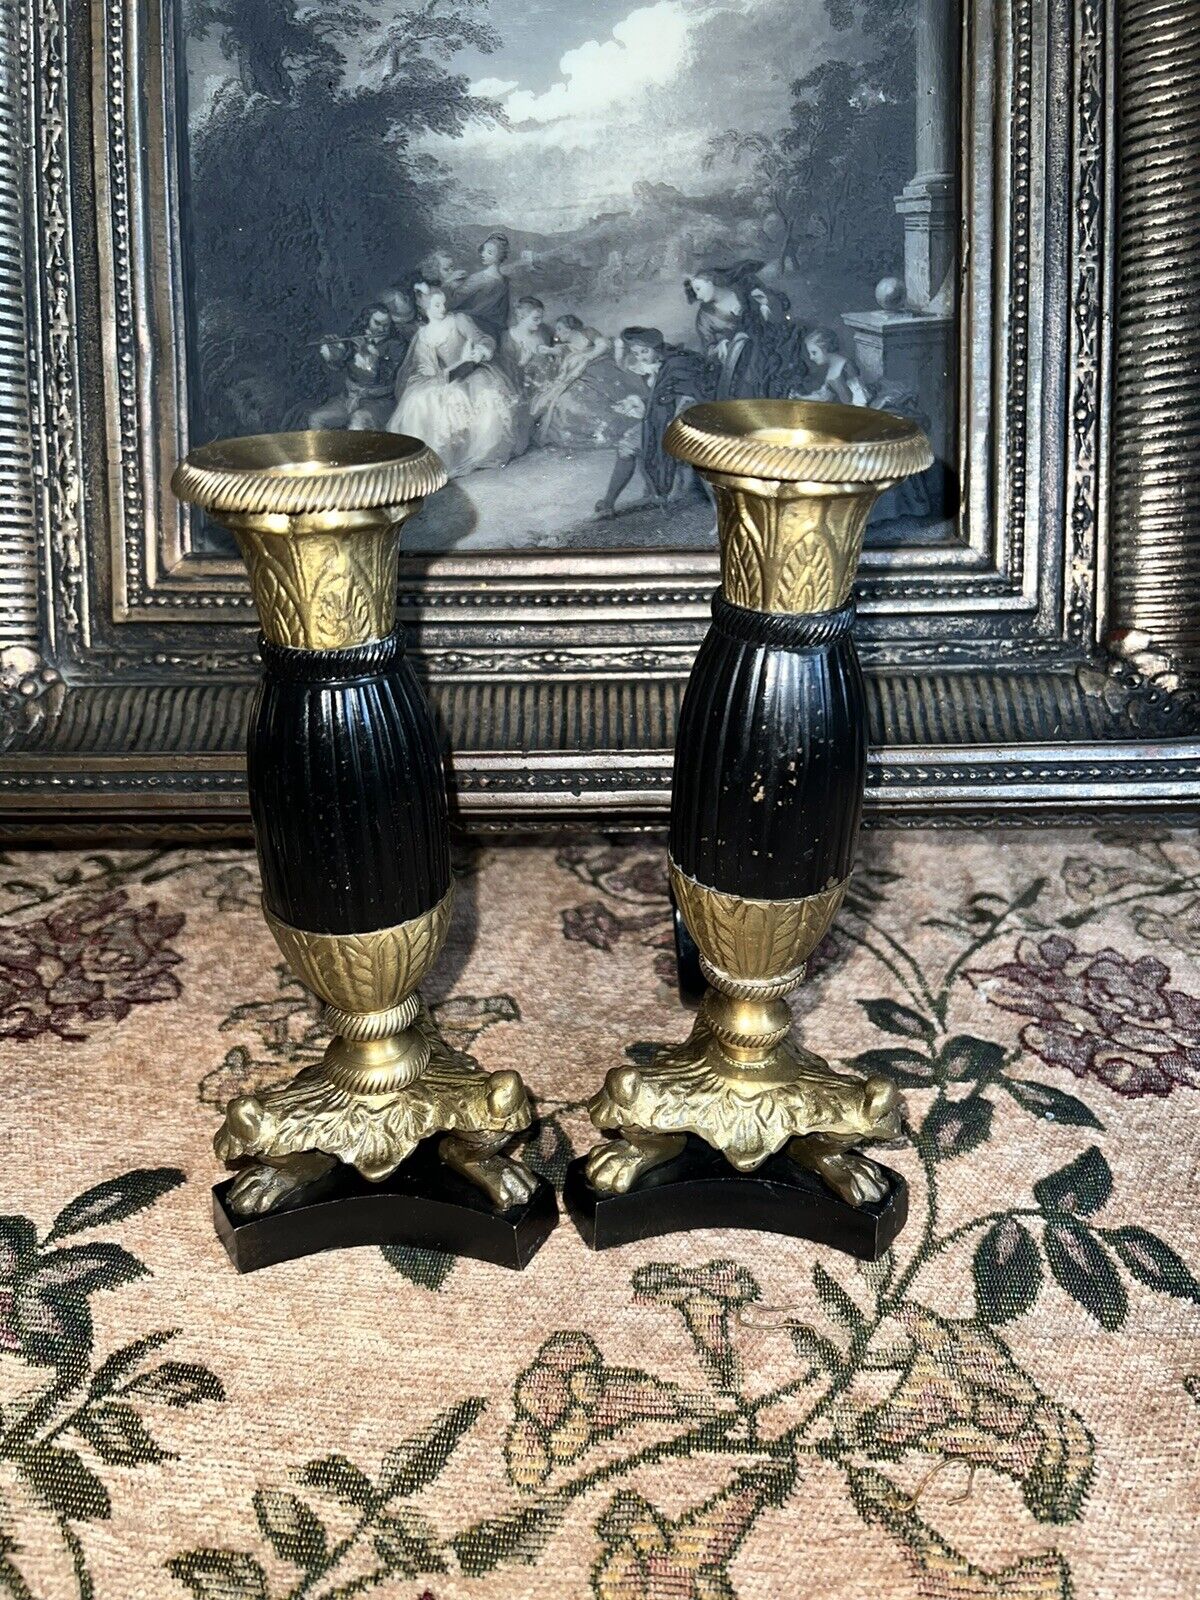 SUPERB PAIR OF FRENCH ANTIQUEEARLY CENTURY BRONZECANDLESTICKS 1820's